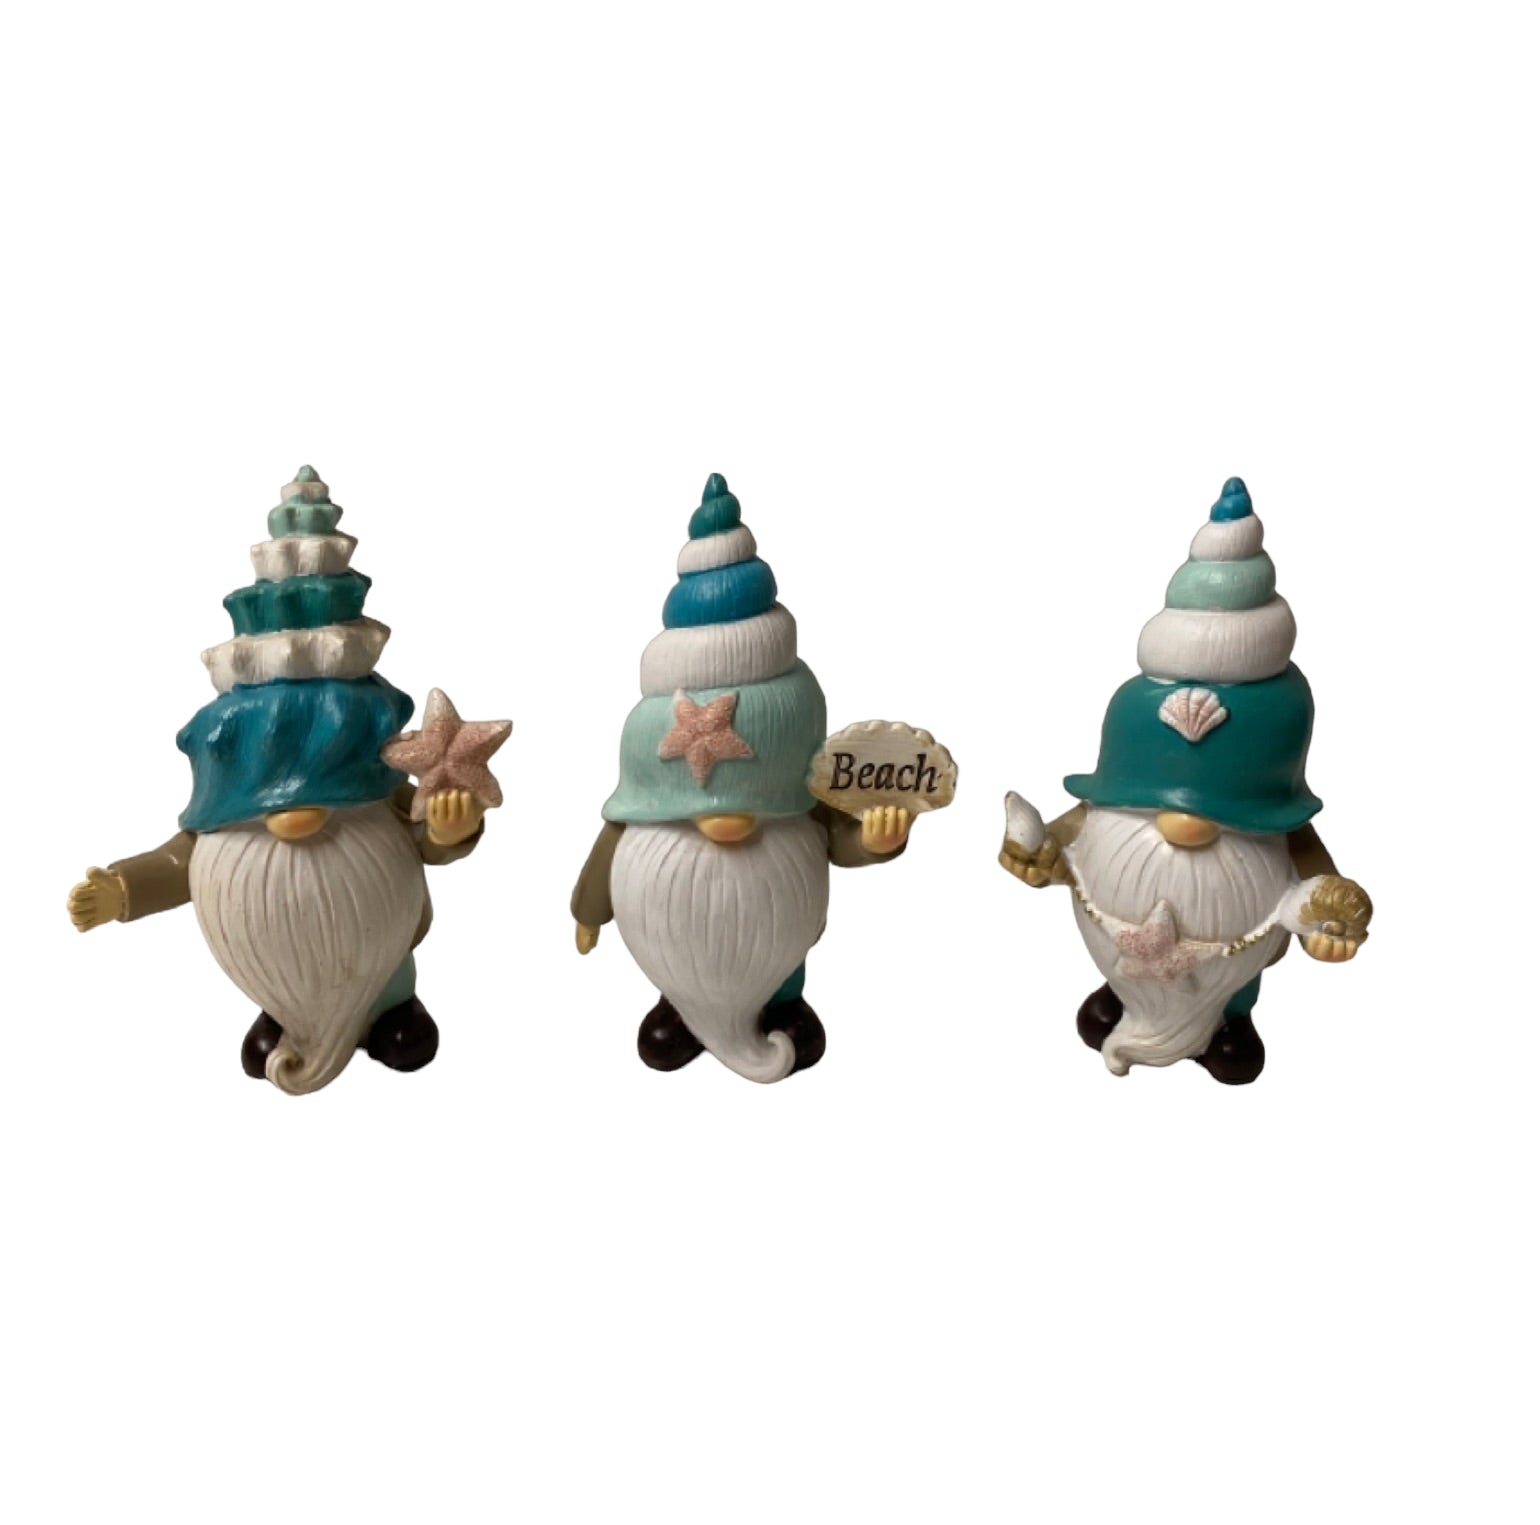 Gnome Set of 3 Beach House Ornament - The Renmy Store Homewares & Gifts 